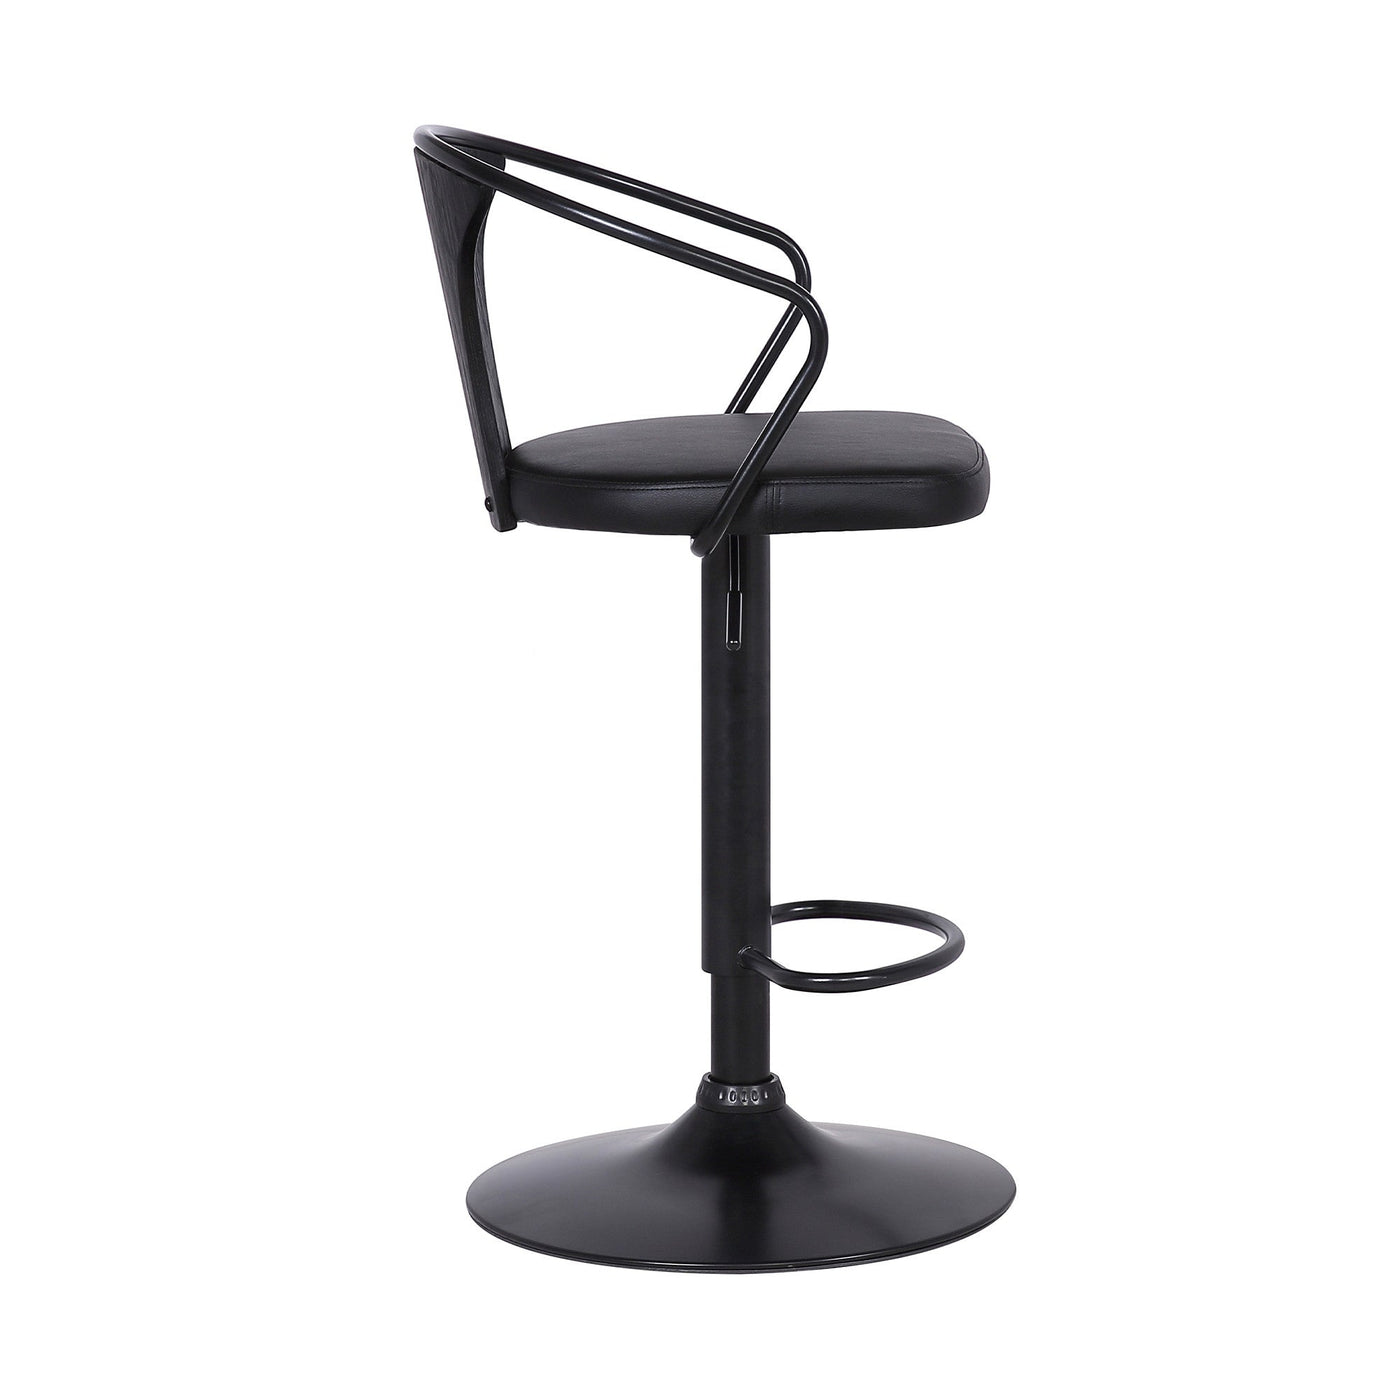 24’ Black Iron Swivel Low Back Adjustable Height Bar Chair - Bar Chairs